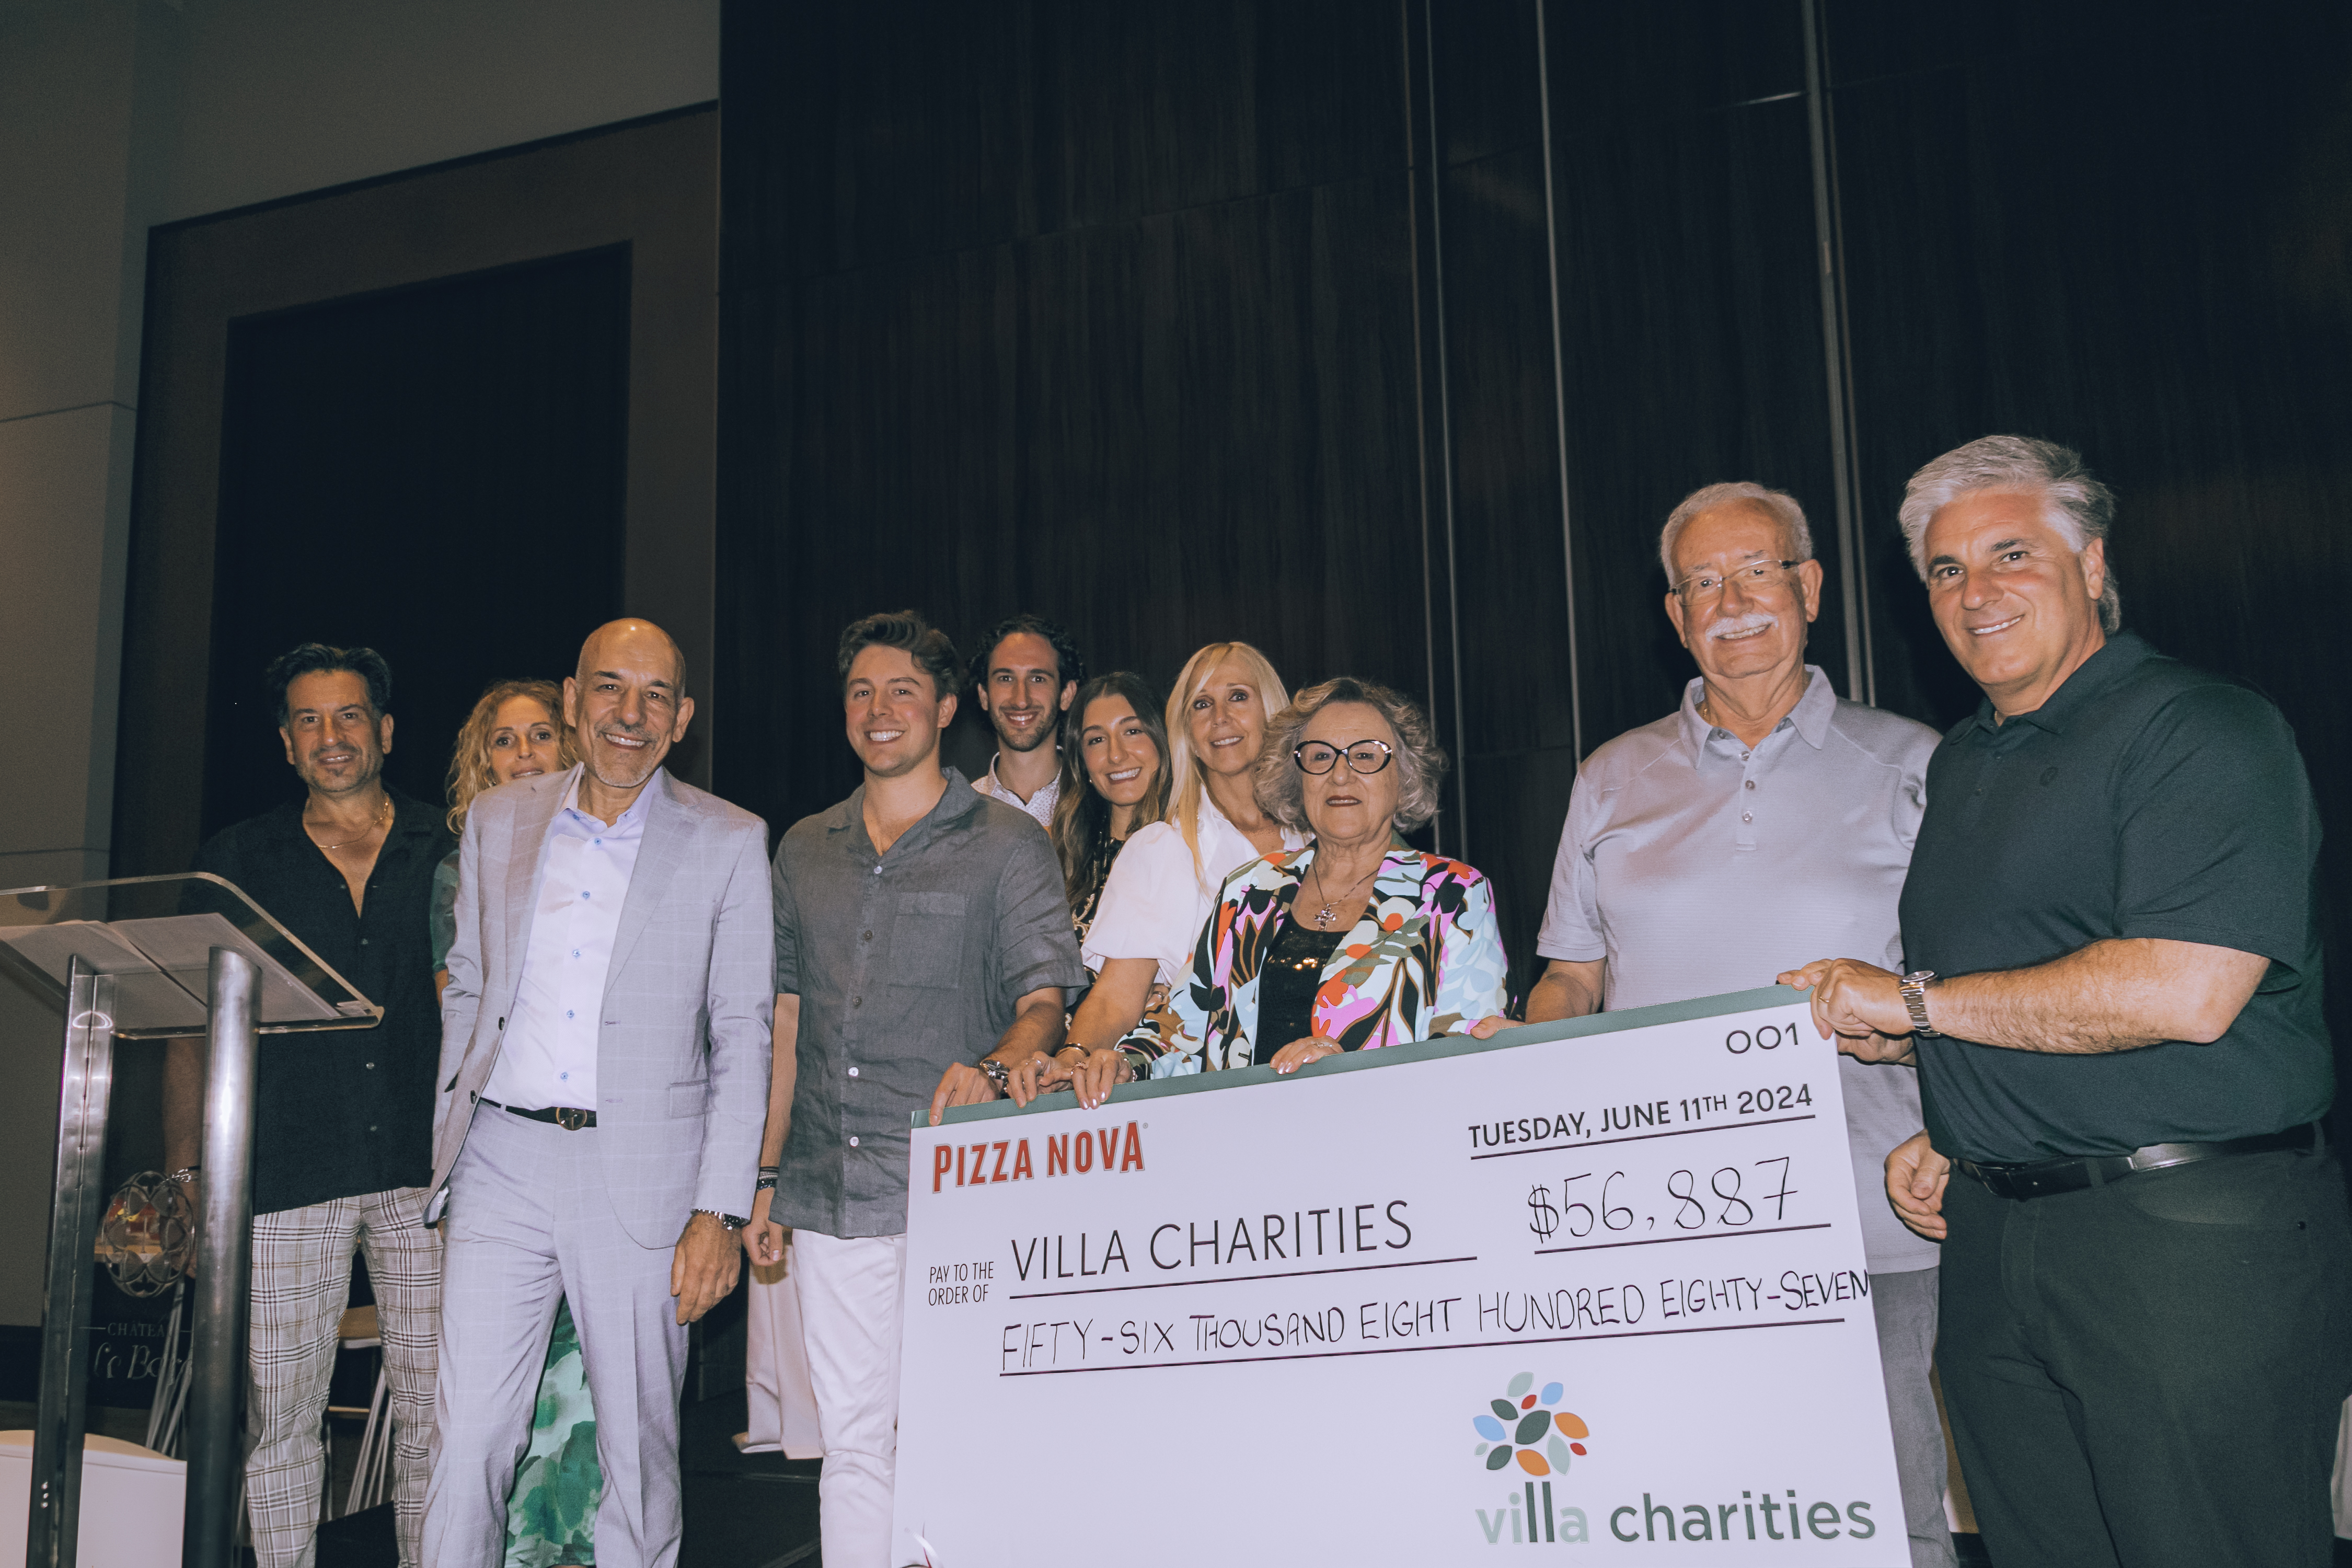 The Primucci Family presents a cheque in the amount of $56,887 to Villa Charities. Marco DeVouno, president and Chief Executive Officer, Villa Charities accepts the donation on June 11, 2024.